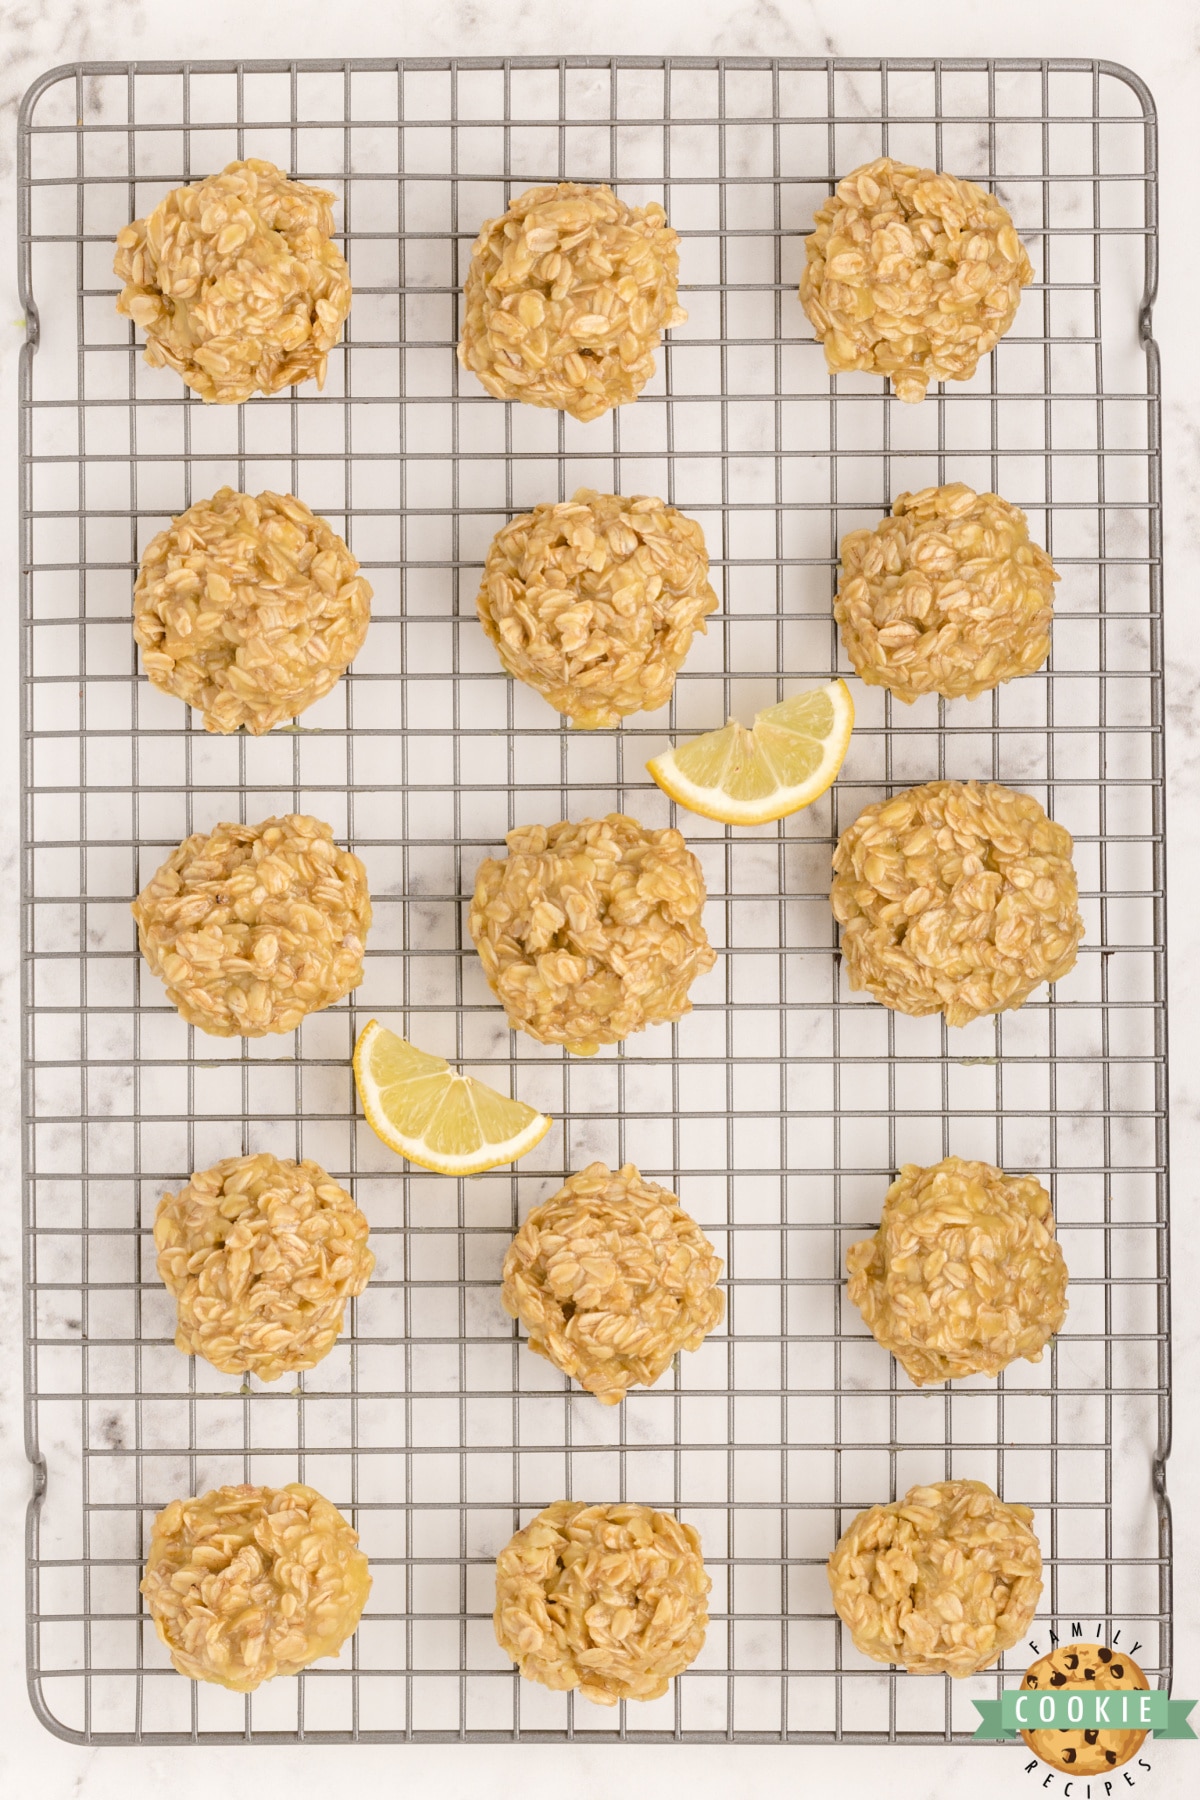 Lemon Oatmeal No Bake Cookies are simple oatmeal cookies made with just a few ingredients. Delicious no bake cookie recipe packed with lemon flavor! 